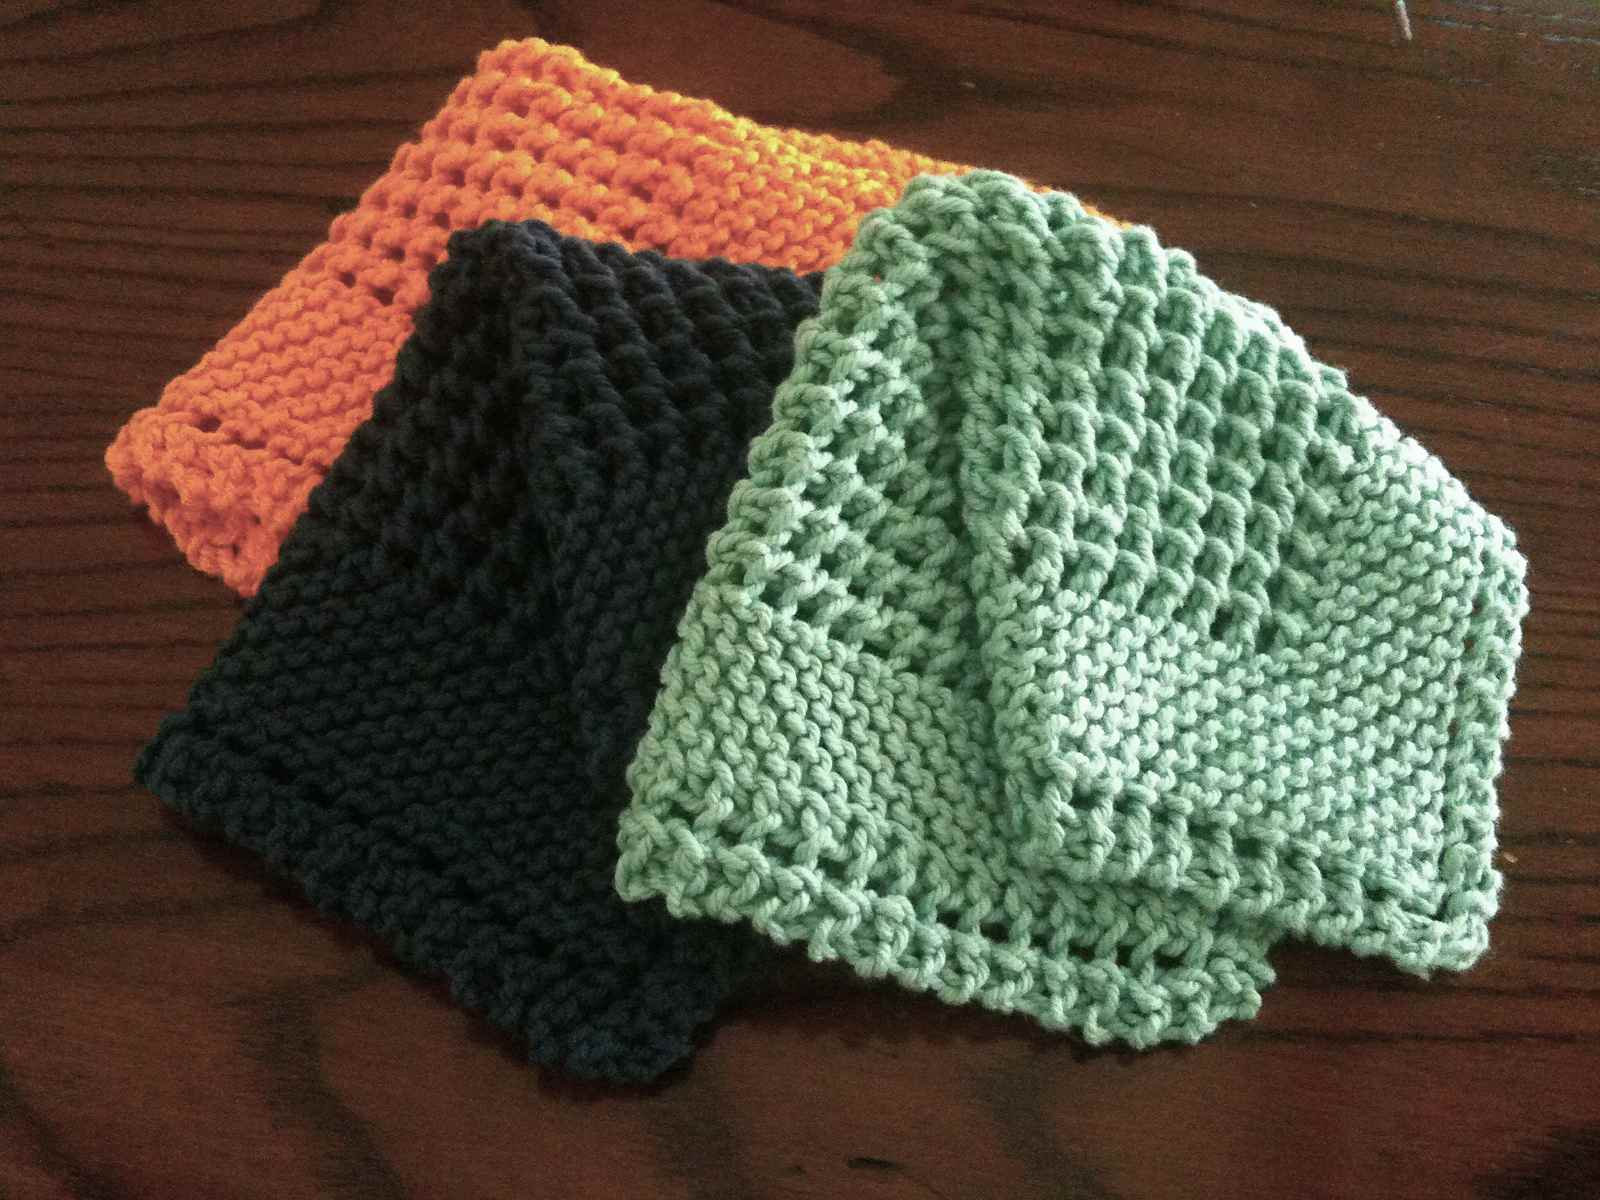 Patterns To Knit 10 Knit Dishcloth Patterns For Beginners